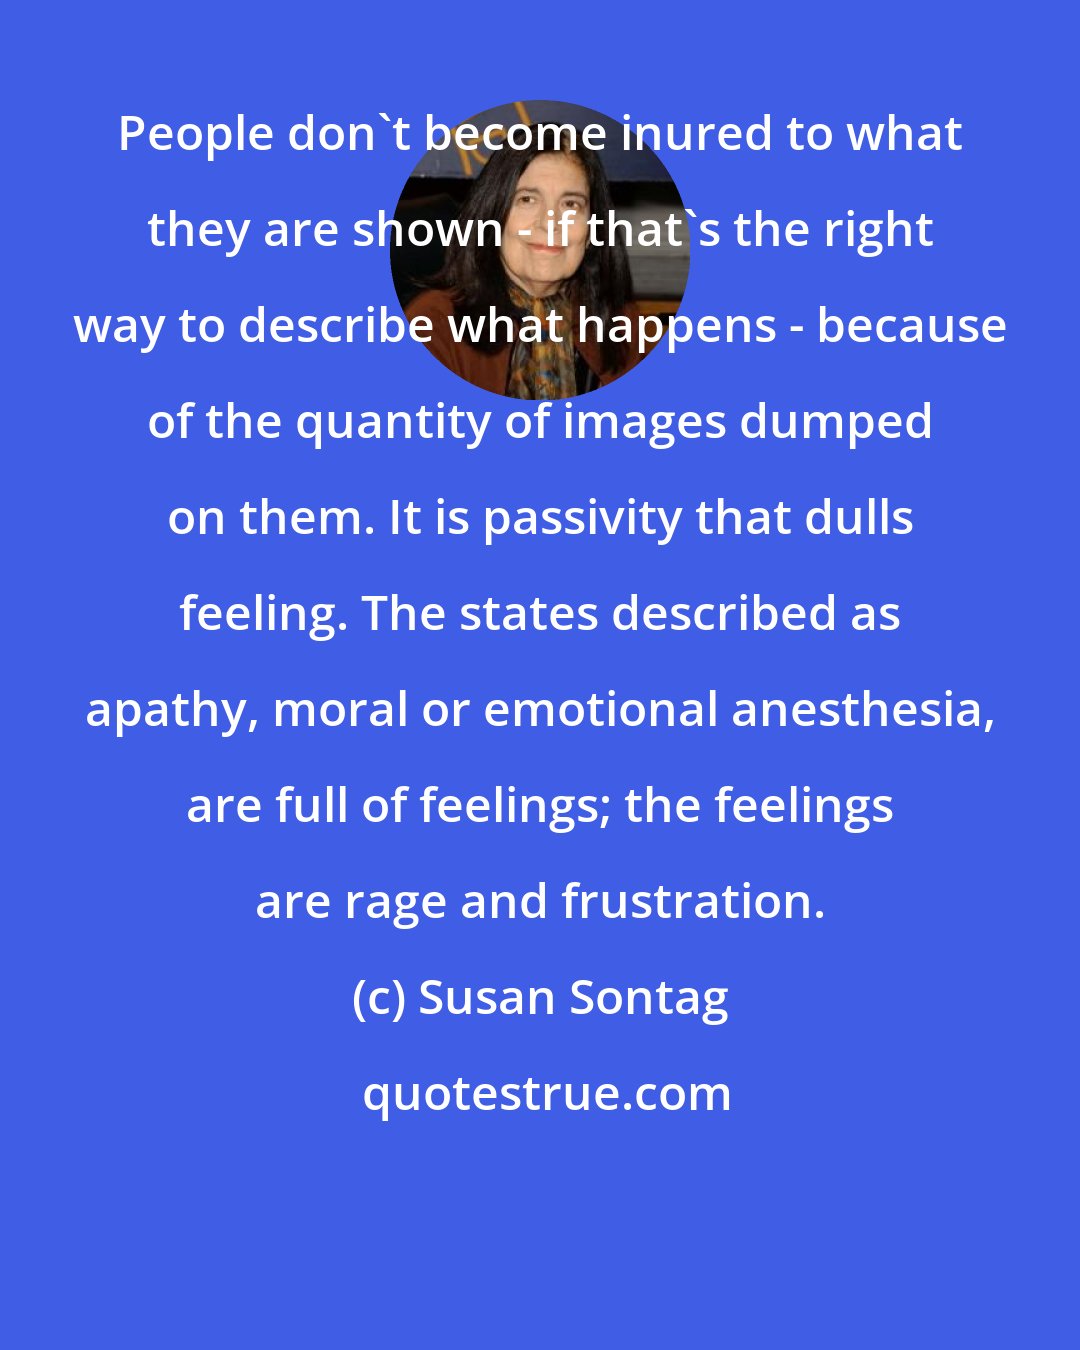 Susan Sontag: People don't become inured to what they are shown - if that's the right way to describe what happens - because of the quantity of images dumped on them. It is passivity that dulls feeling. The states described as apathy, moral or emotional anesthesia, are full of feelings; the feelings are rage and frustration.